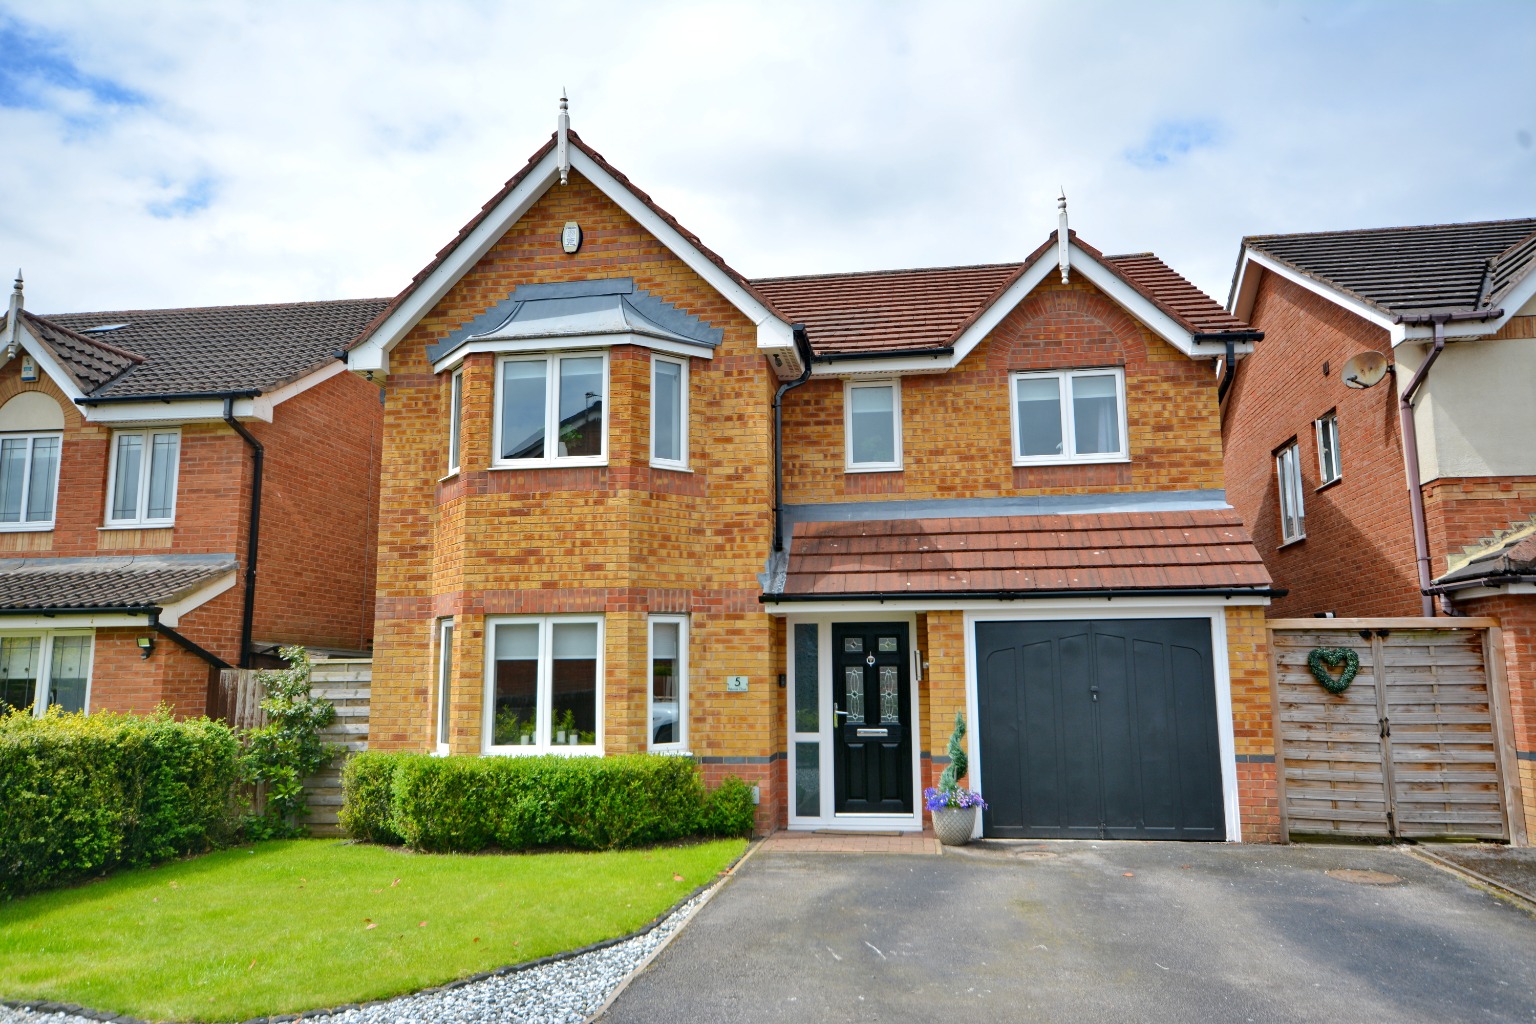 4 bed detached house for sale in Petunia Close, St. Helens - Property Image 1